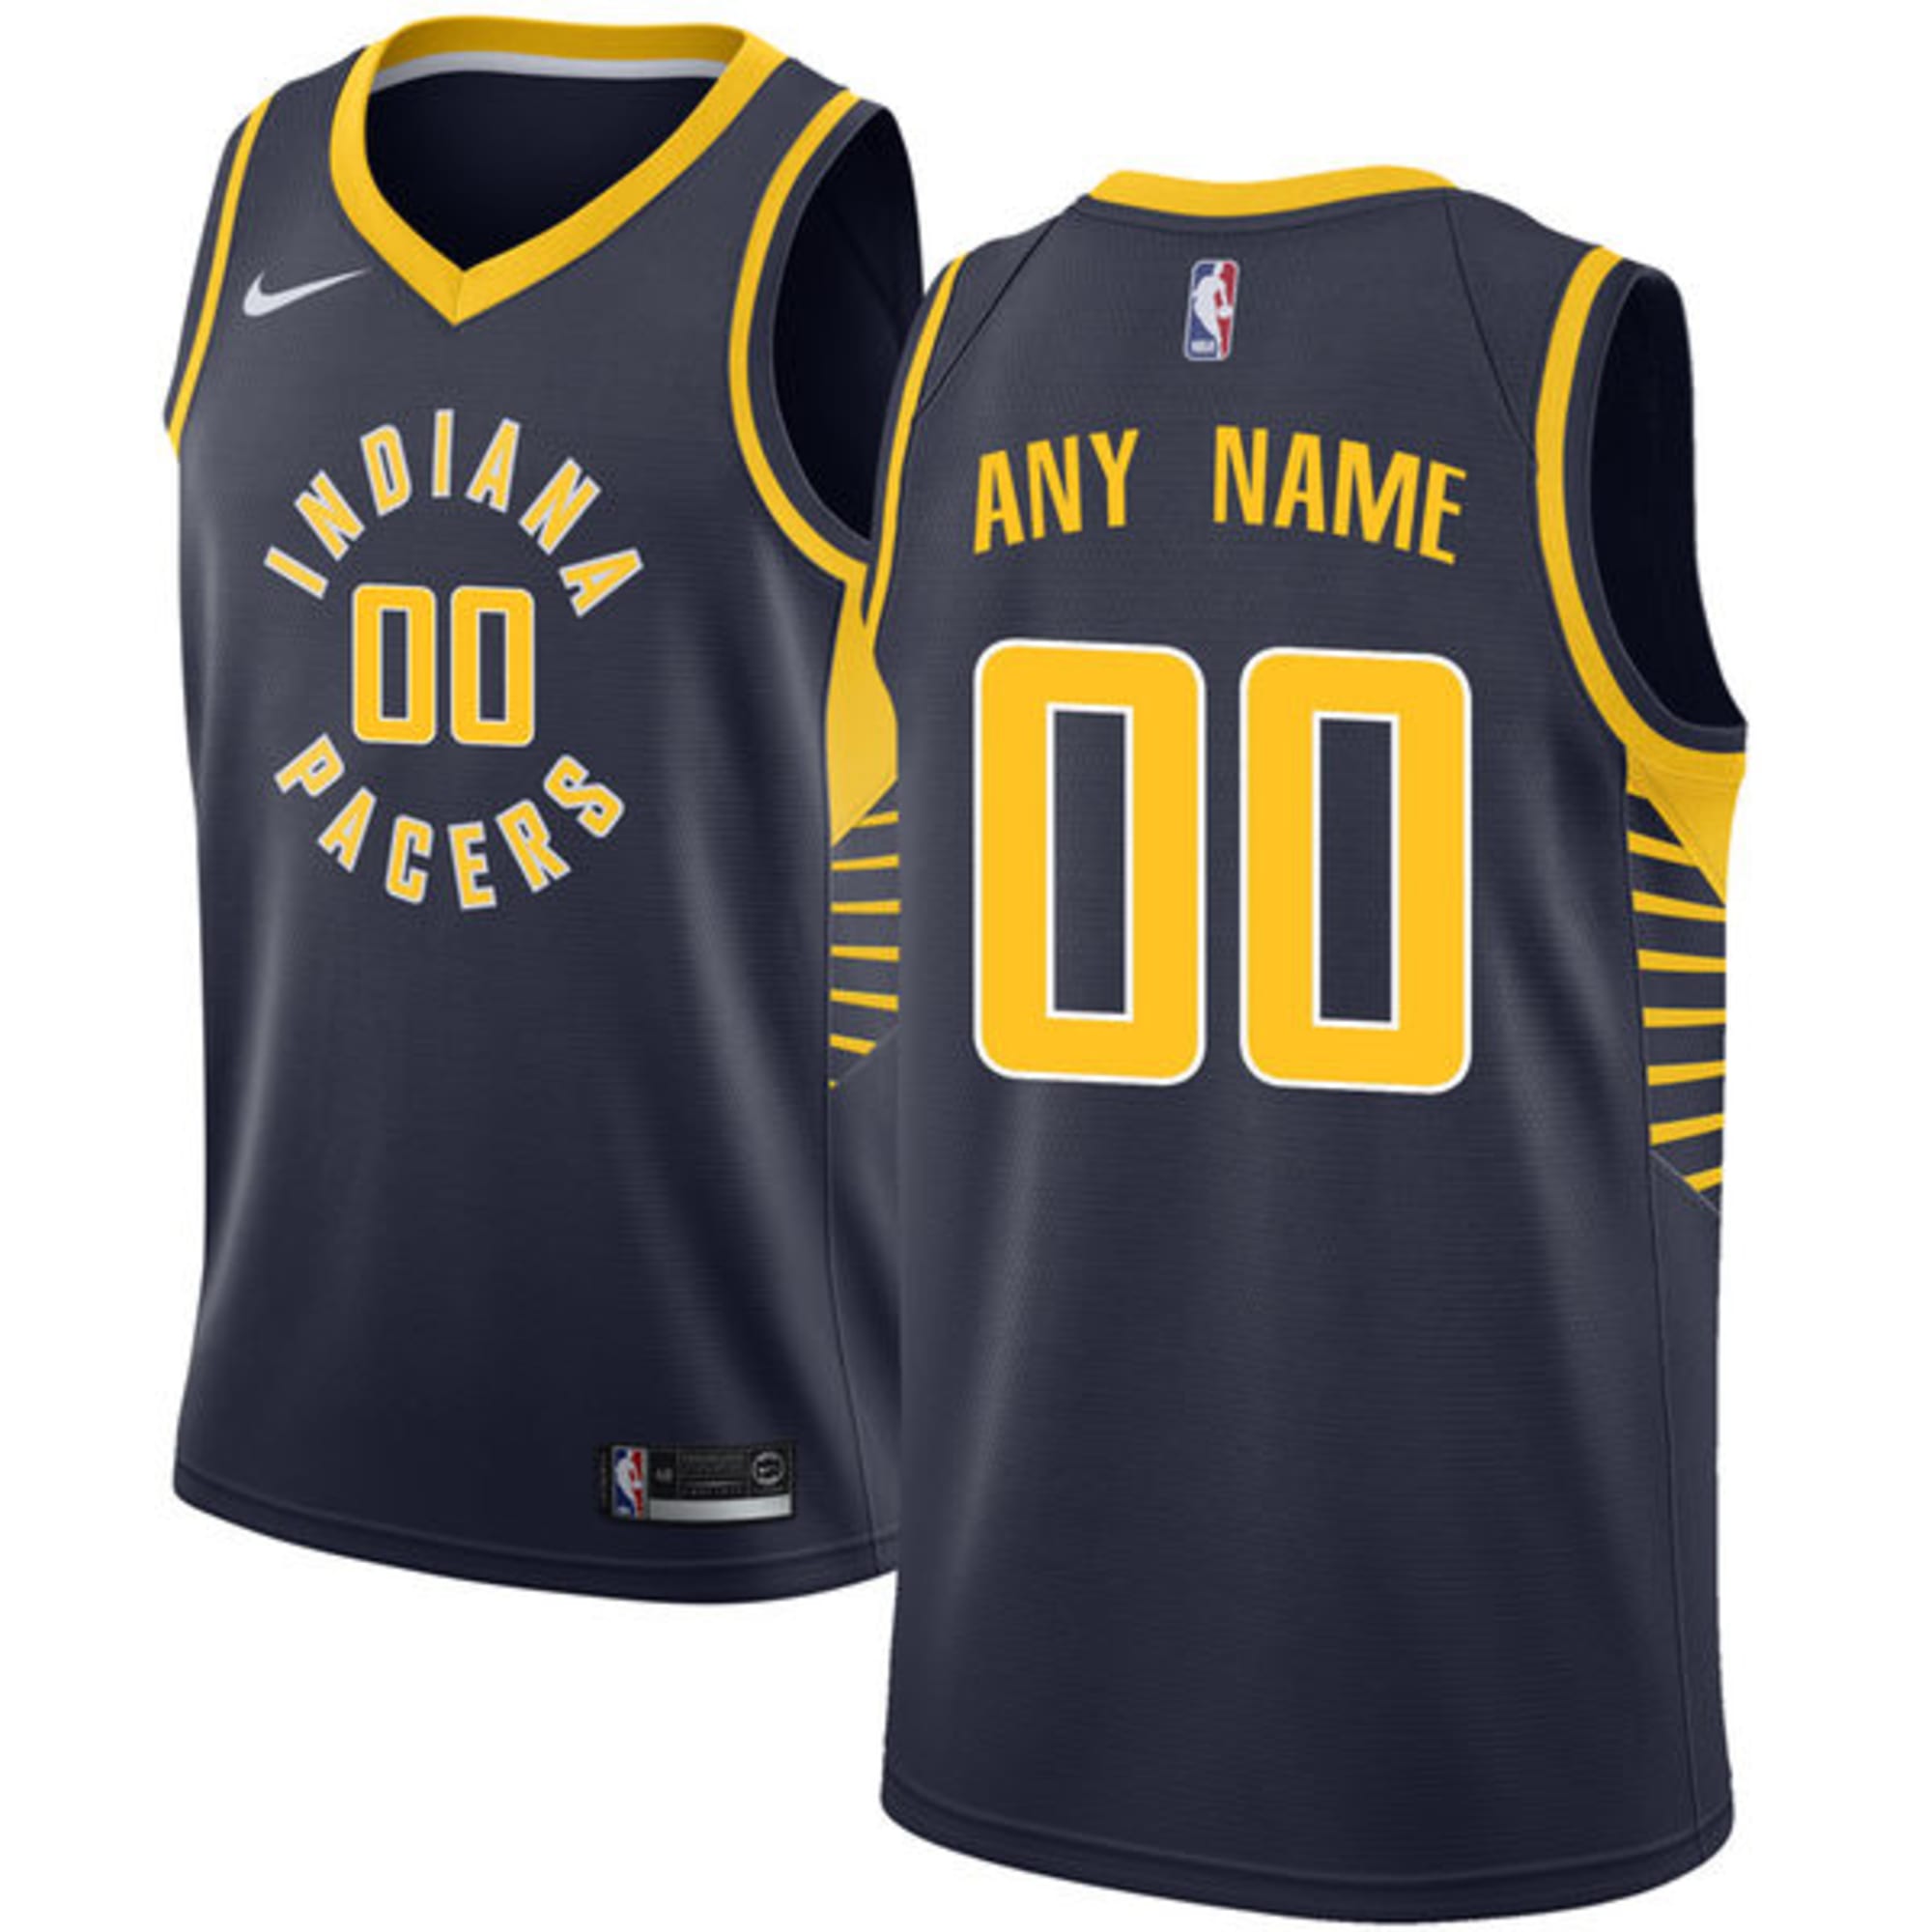 Order your Indiana Pacers Nike City Edition gear today